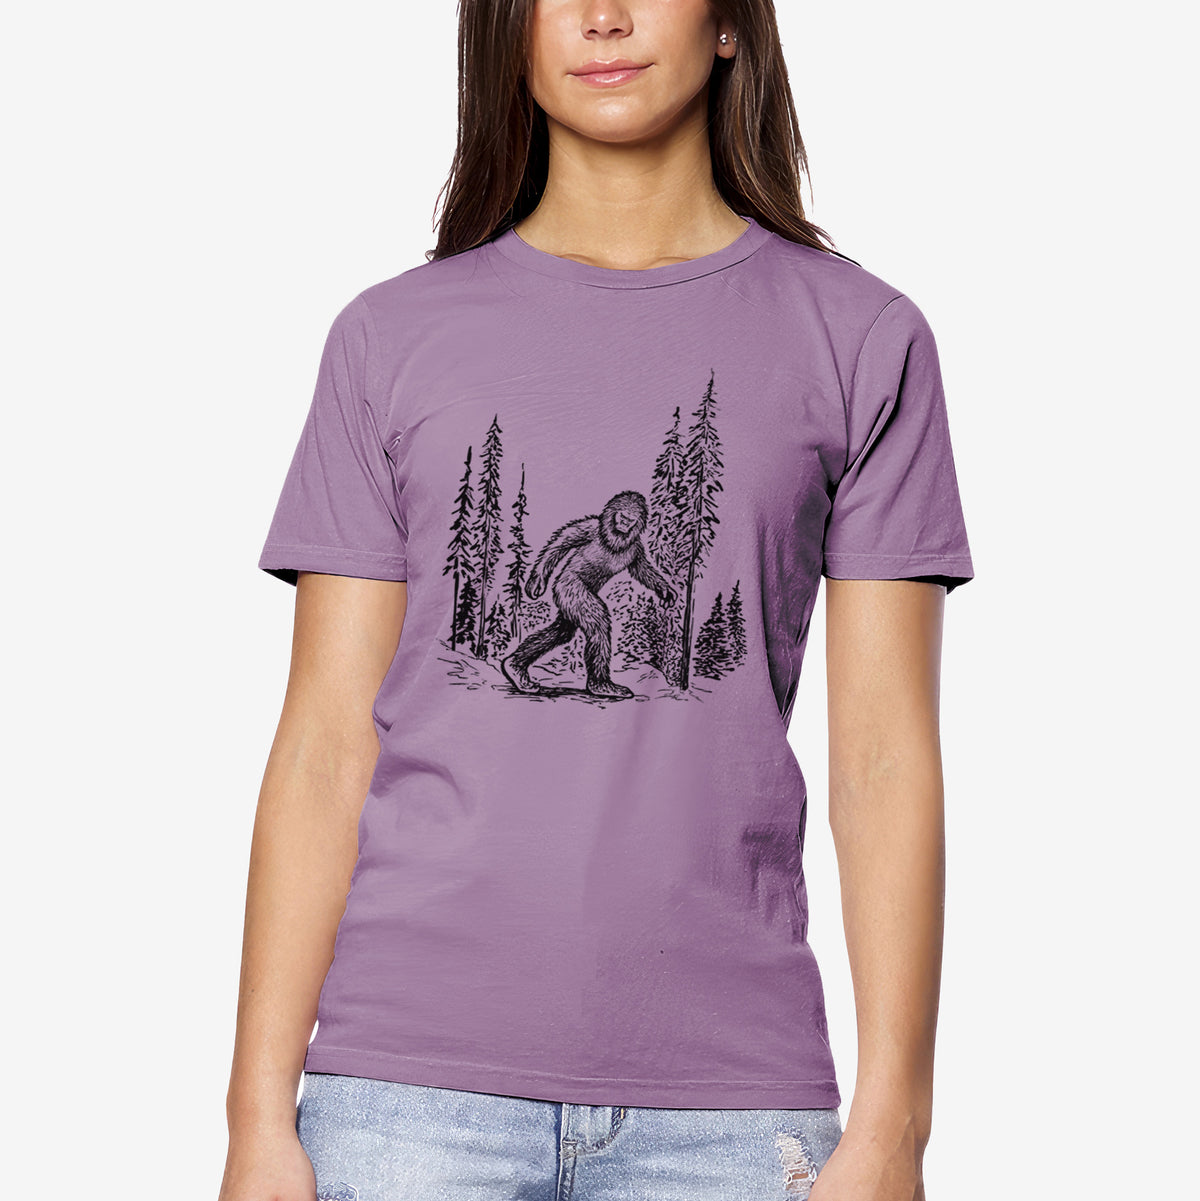 Bigfoot in the Woods - Unisex Crewneck - Made in USA - 100% Organic Cotton